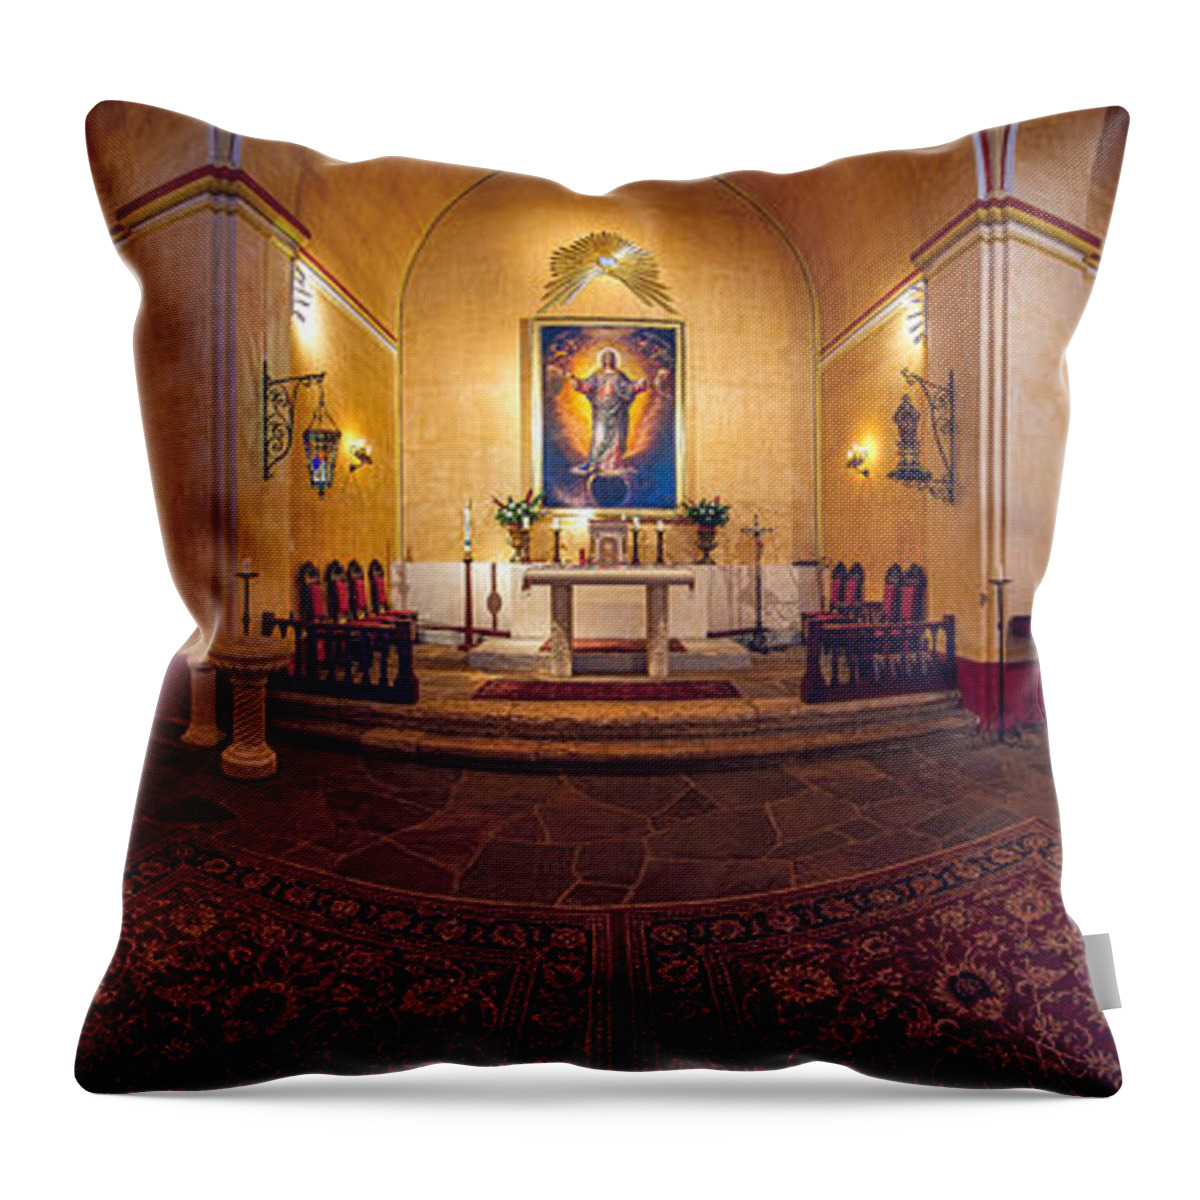 San Antonio Throw Pillow featuring the photograph Mission Concepcion Pano by Tim Stanley